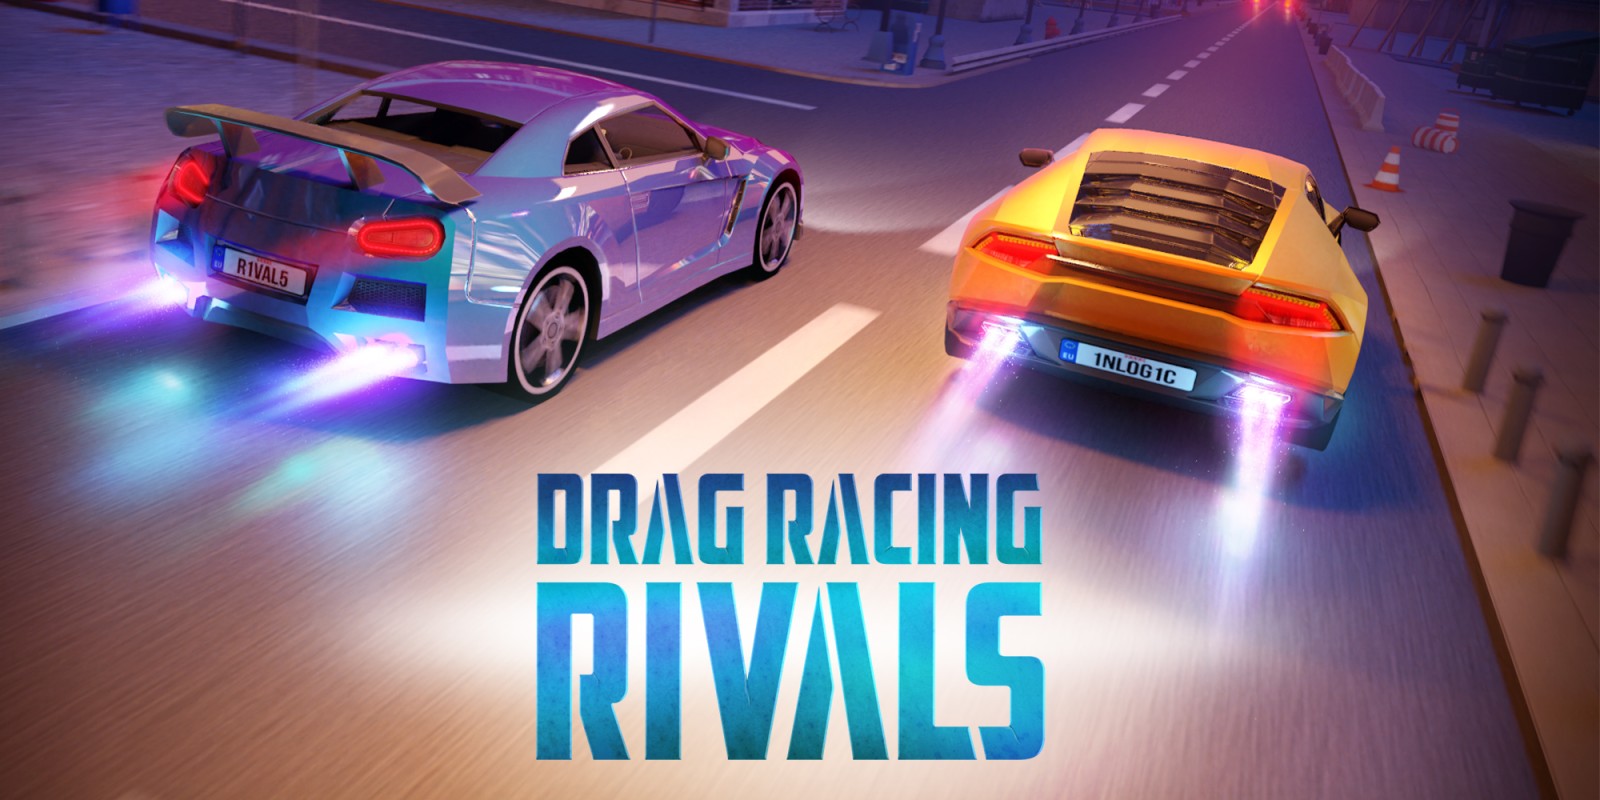 drag race track game